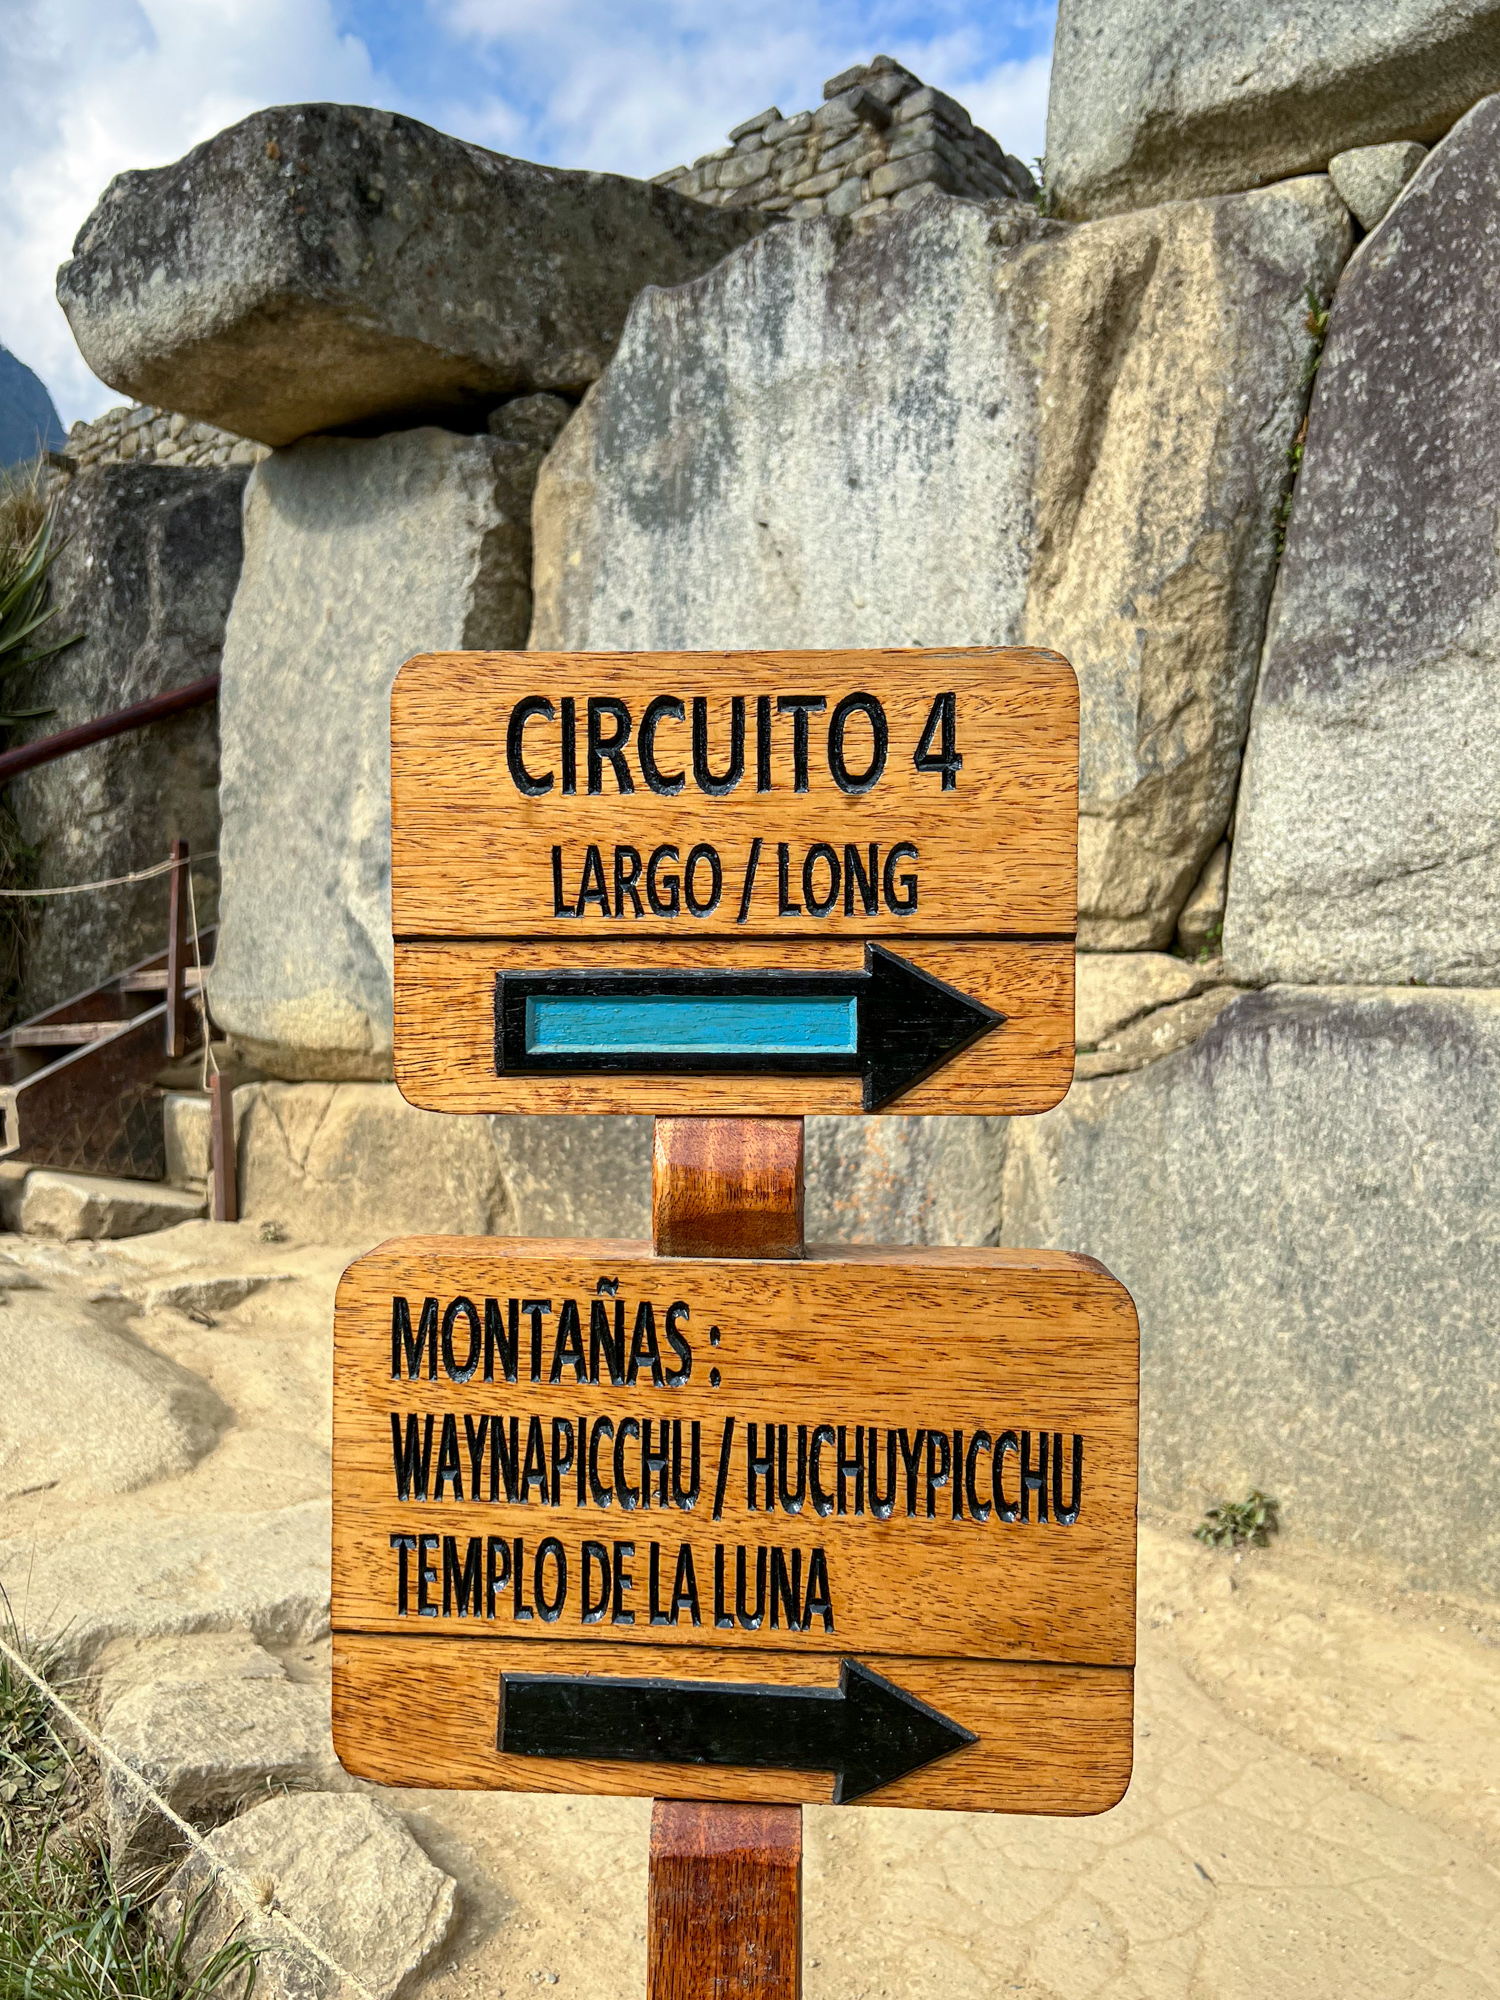 Sign for Circuit 4 at the Machu Picchu ruins 